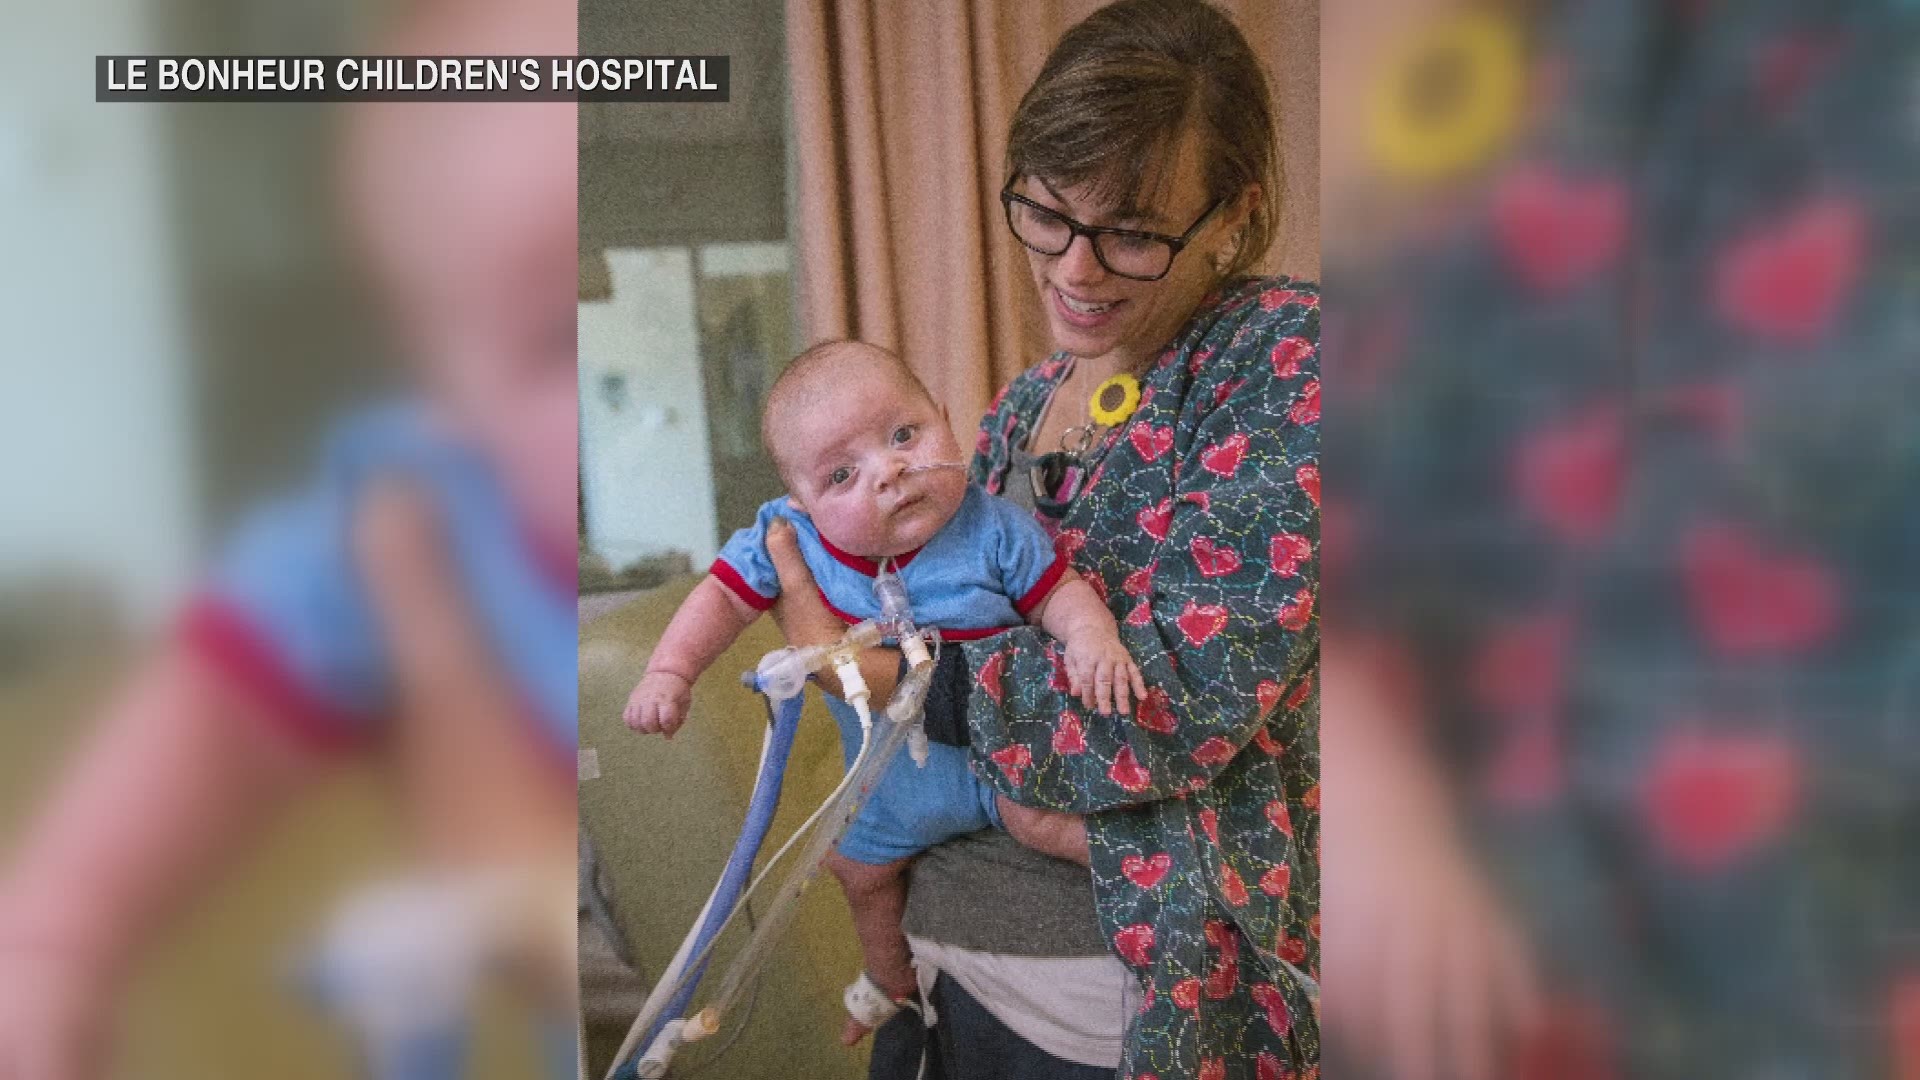 Using parts of Cooper’s ribs, doctors were able to create a voice box and airway for him. It’s something that was never successfully done before. Now, five months later, Cooper is beginning to make noises and only using his ventilator at night.